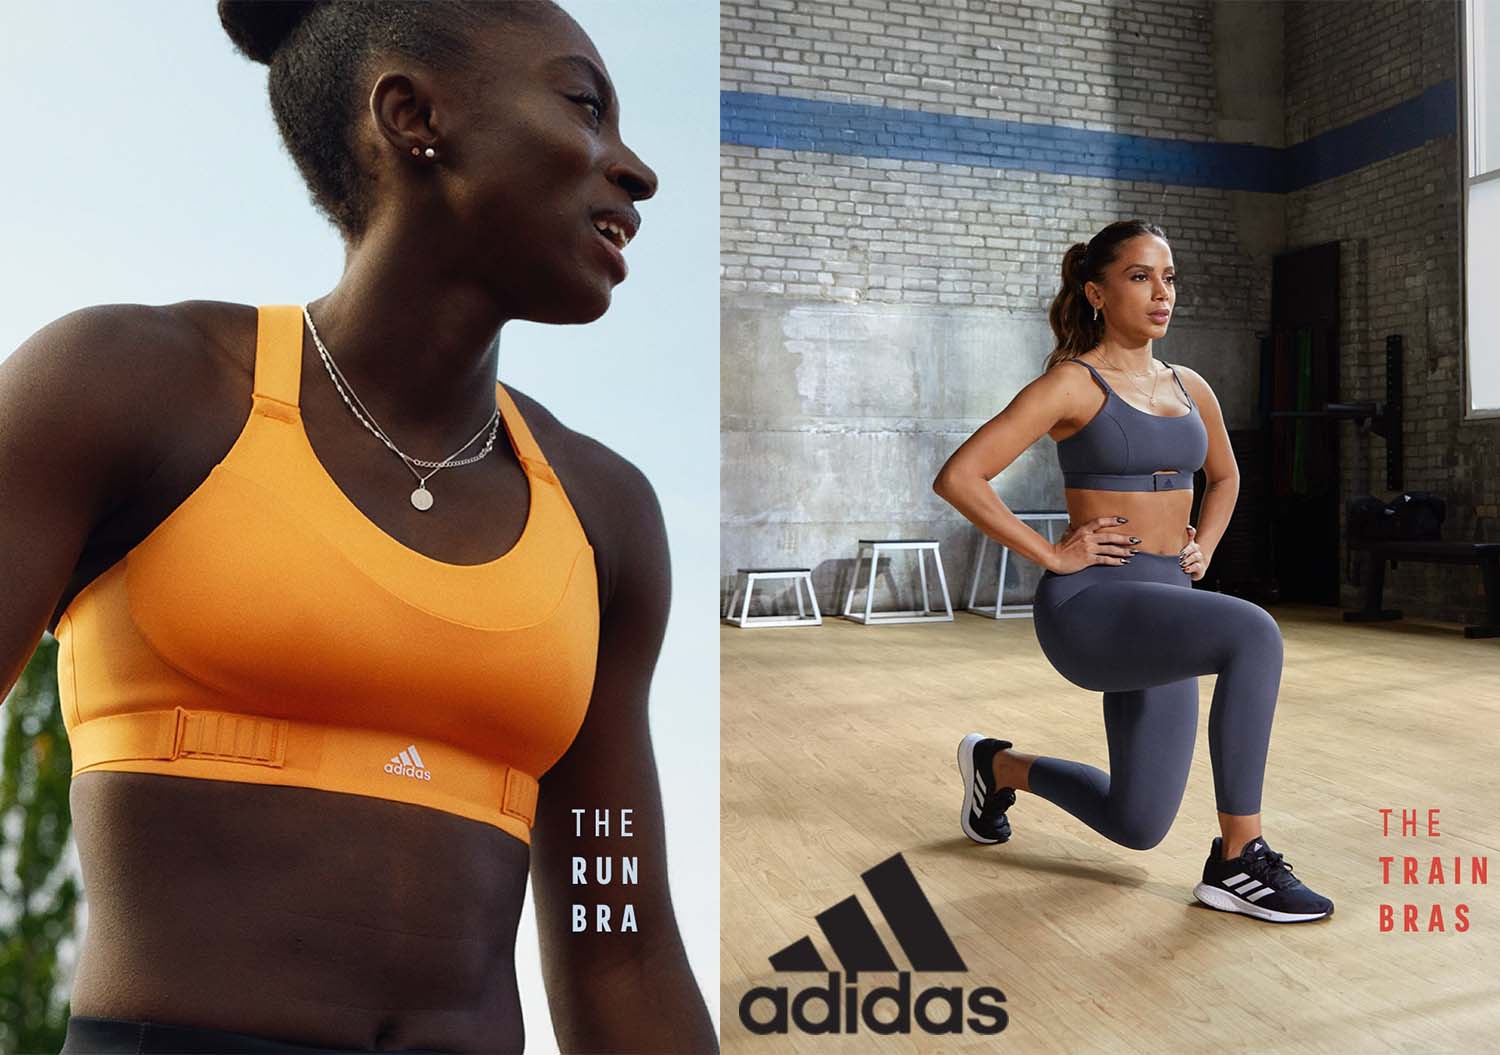 How We Test Our Revolutionary Sports Bras